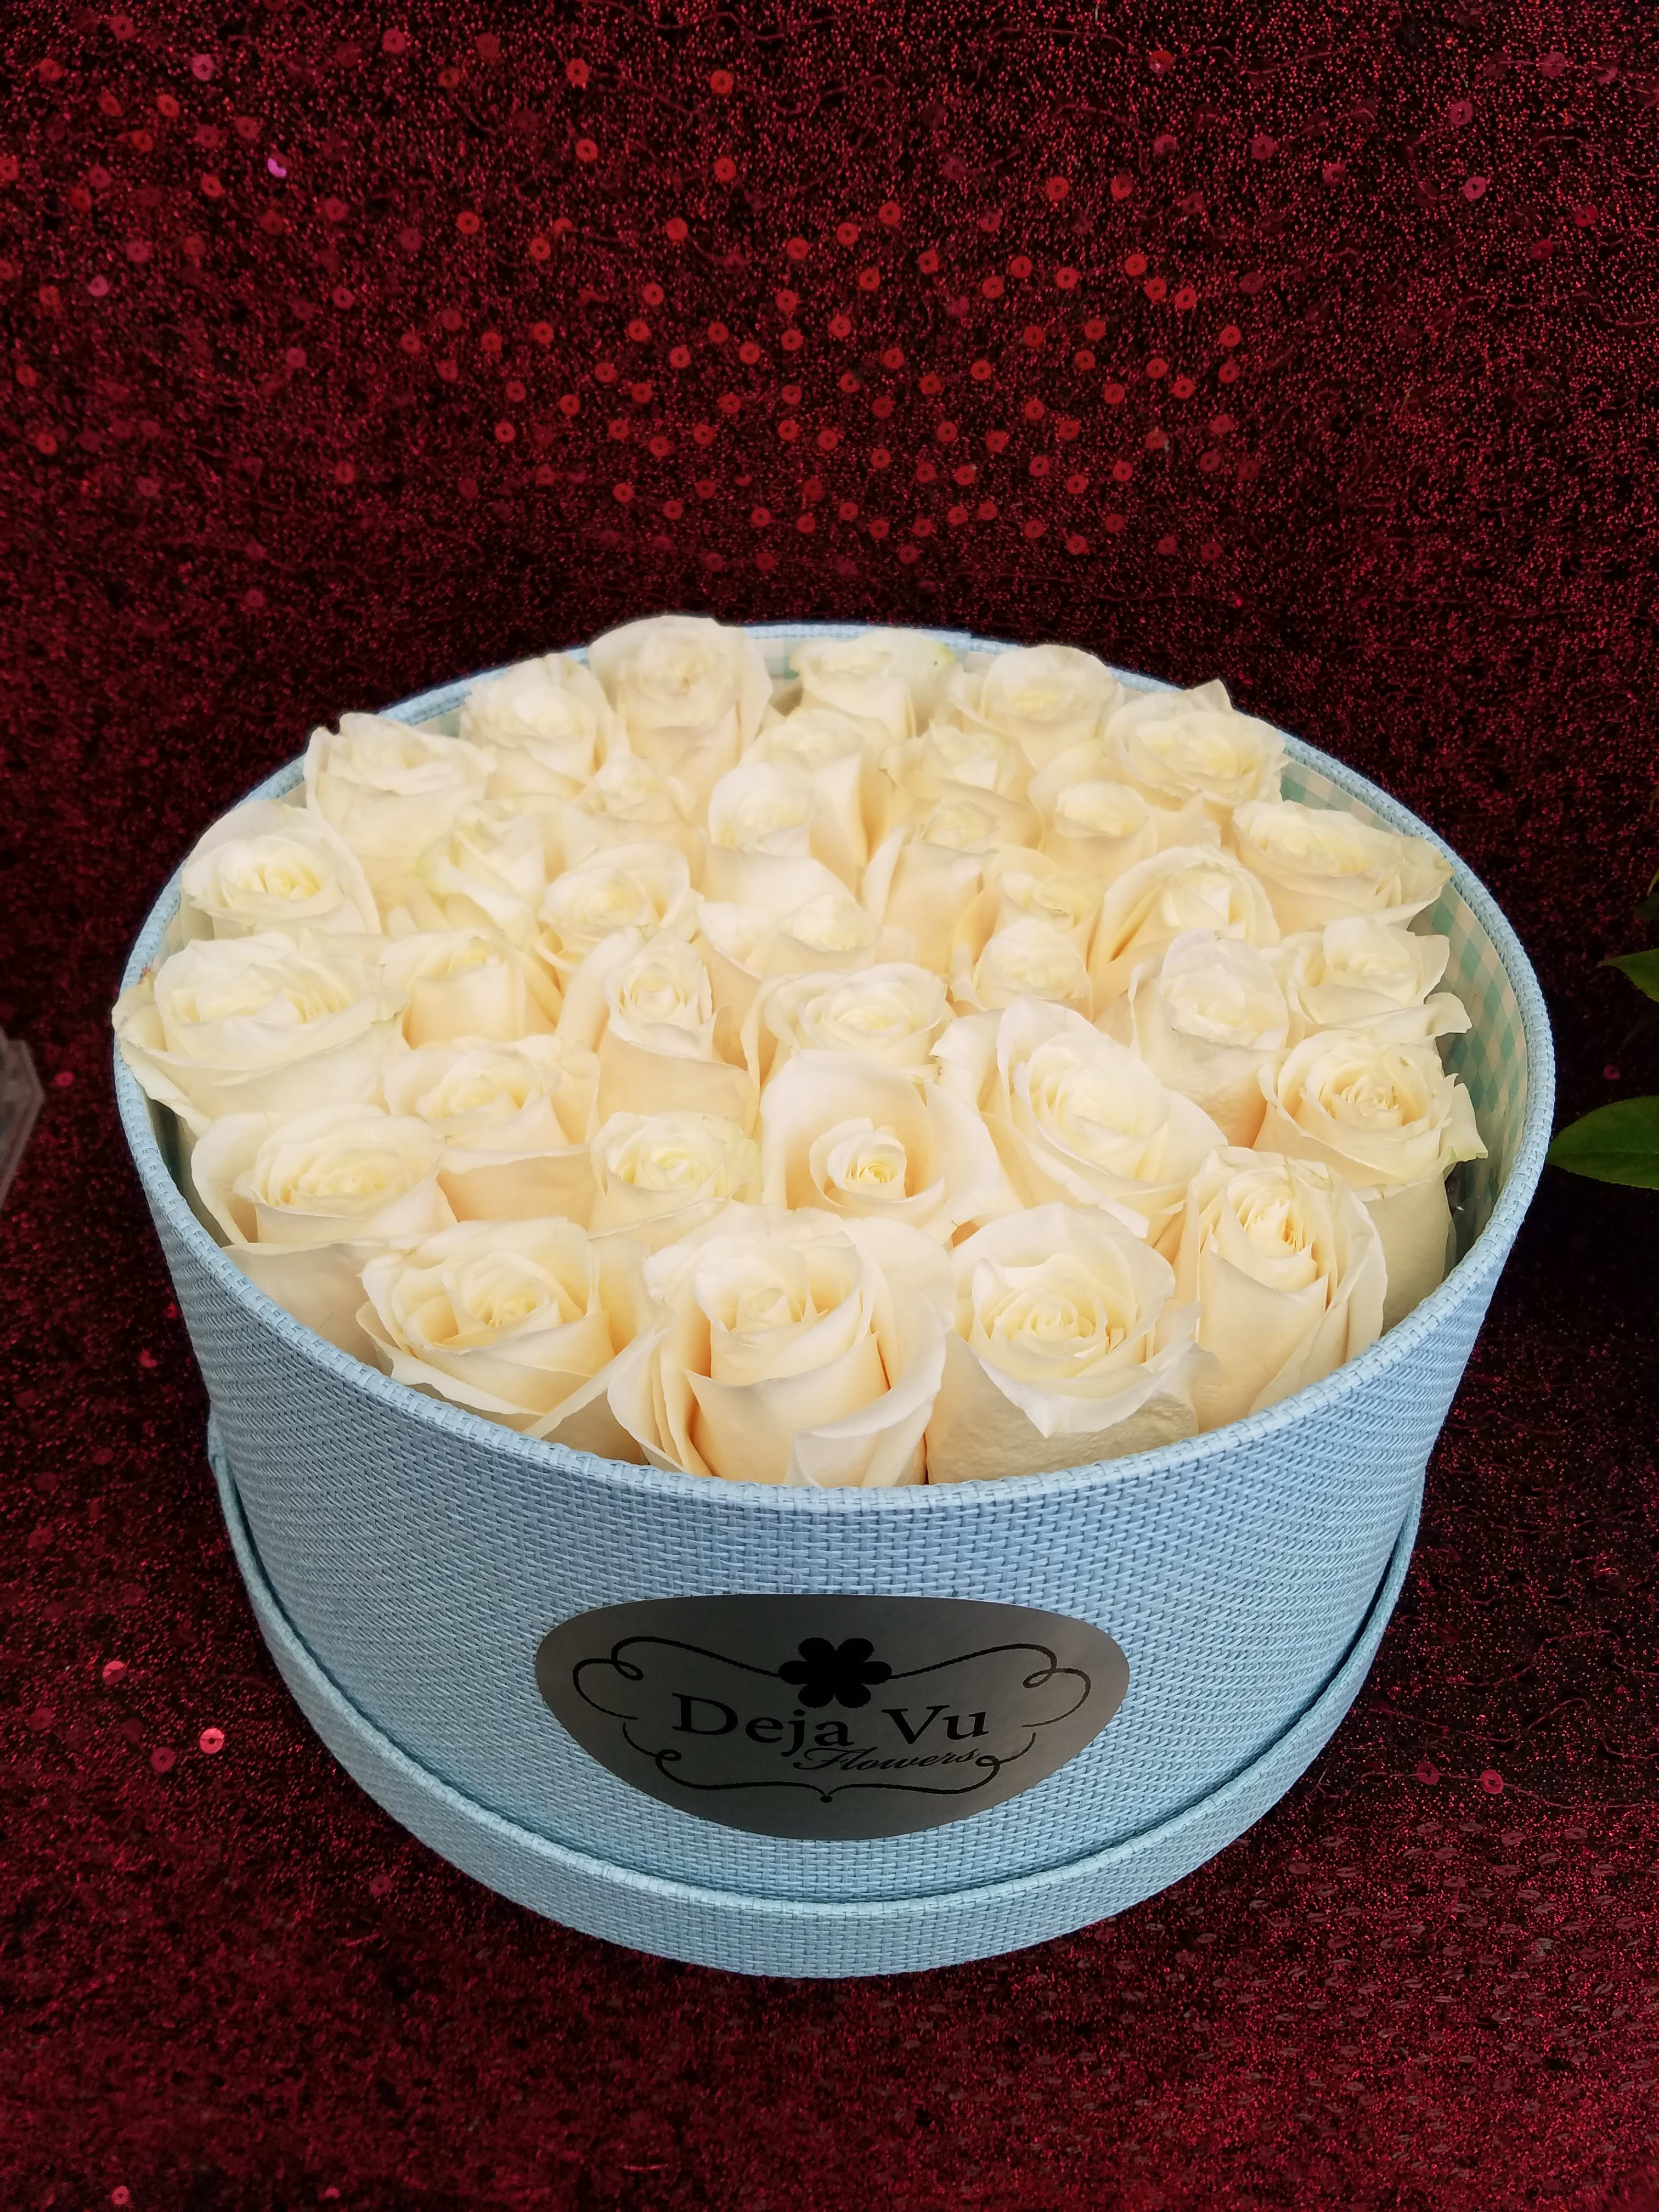 Preserved Eternal Roses in Heart Shaped Boxes by Deja Vu flowers